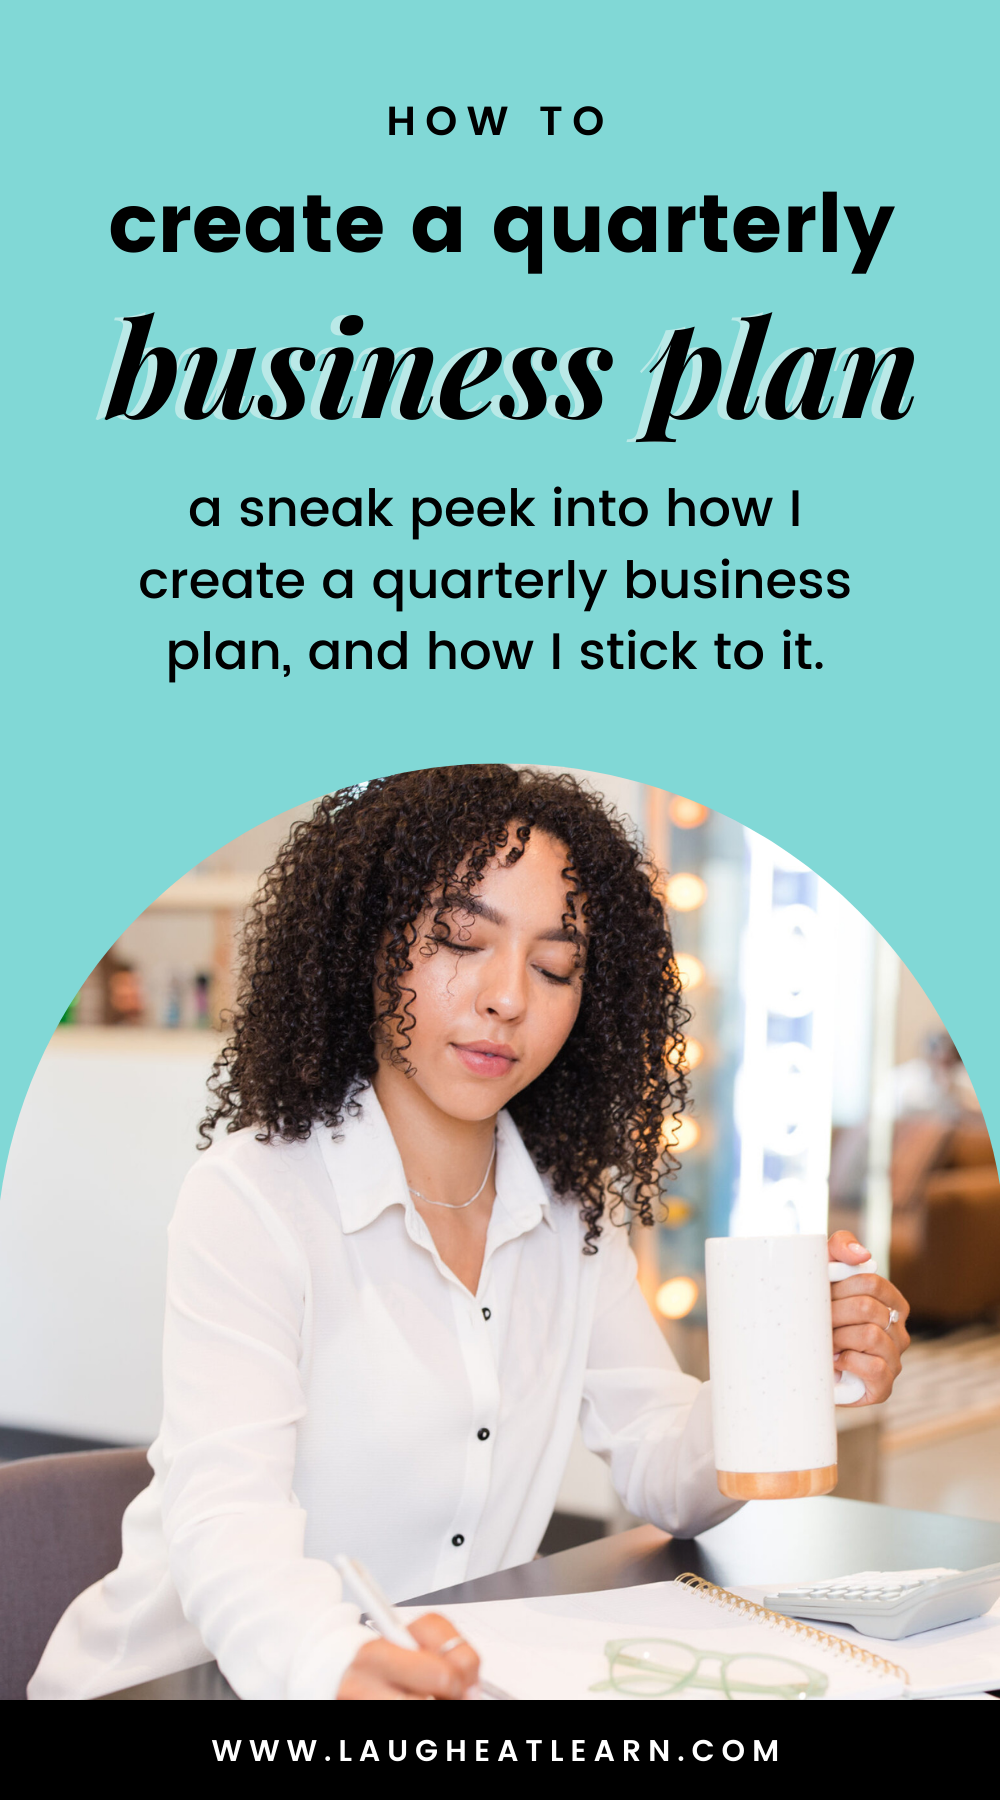 Not sure how to create a quarterly business plan? I'm spilling all the details about how I put my plan together.